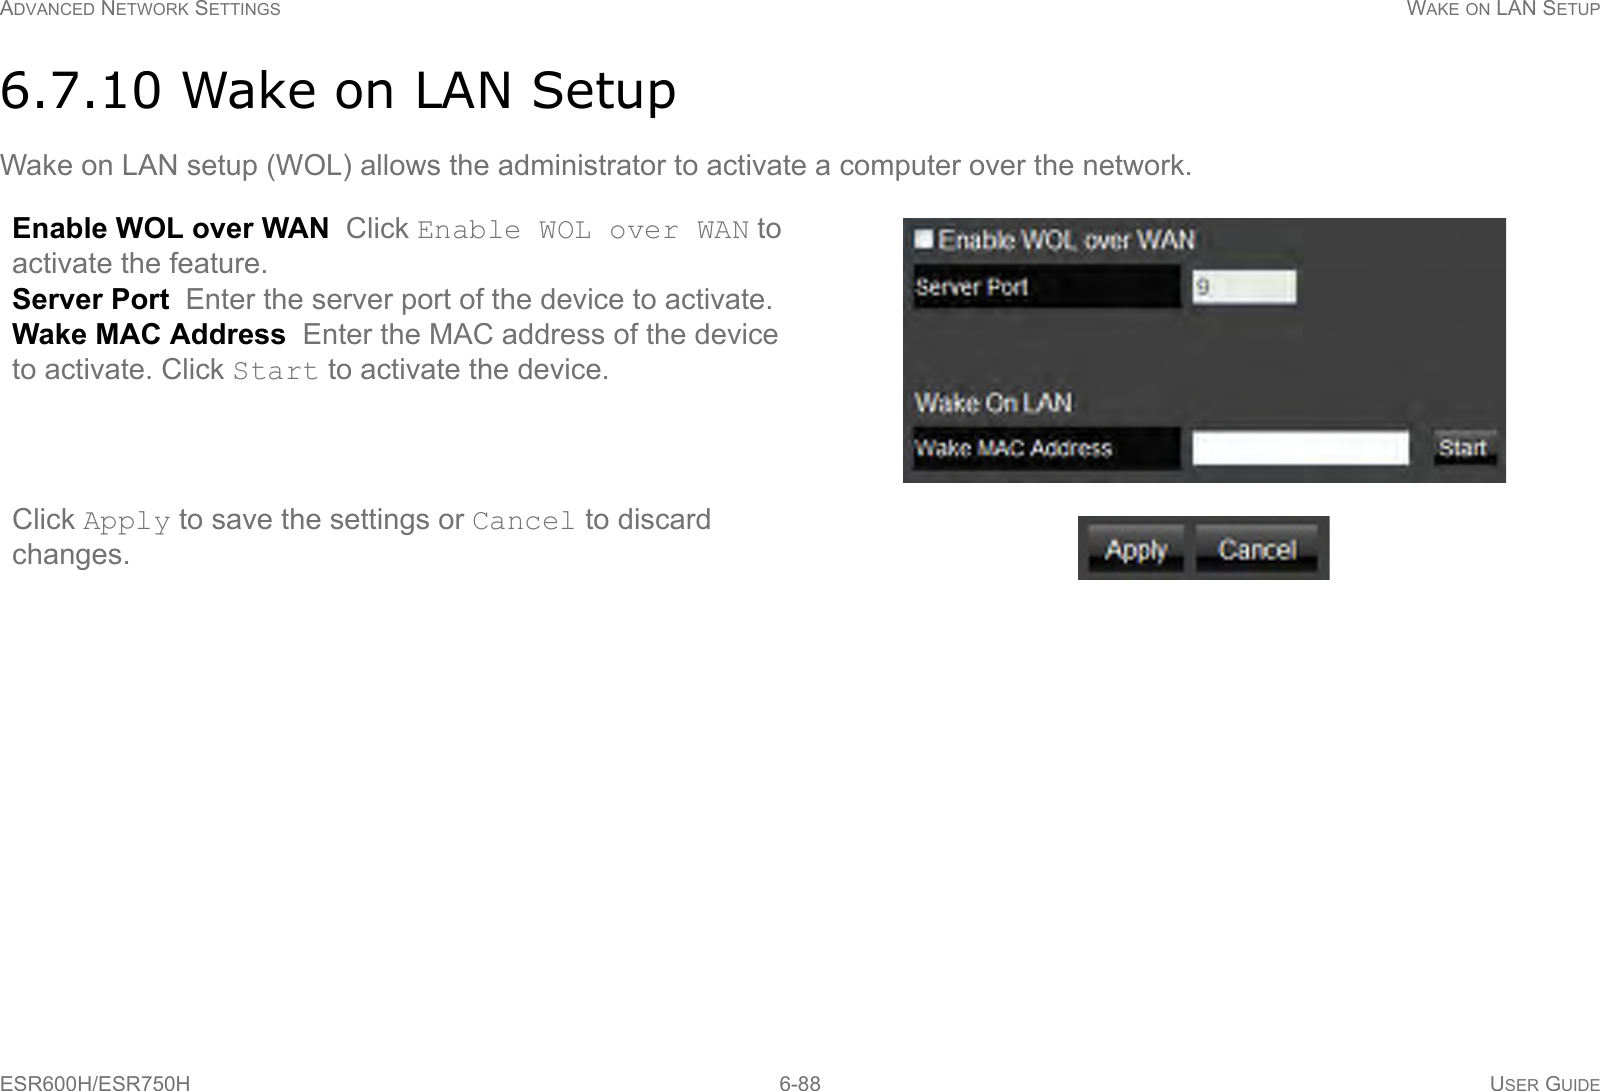 ADVANCED NETWORK SETTINGS WAKE ON LAN SETUPESR600H/ESR750H 6-88 USER GUIDE6.7.10 Wake on LAN SetupWake on LAN setup (WOL) allows the administrator to activate a computer over the network.Enable WOL over WAN  Click Enable WOL over WAN to activate the feature.Server Port  Enter the server port of the device to activate.Wake MAC Address  Enter the MAC address of the device to activate. Click Start to activate the device.Click Apply to save the settings or Cancel to discard changes.